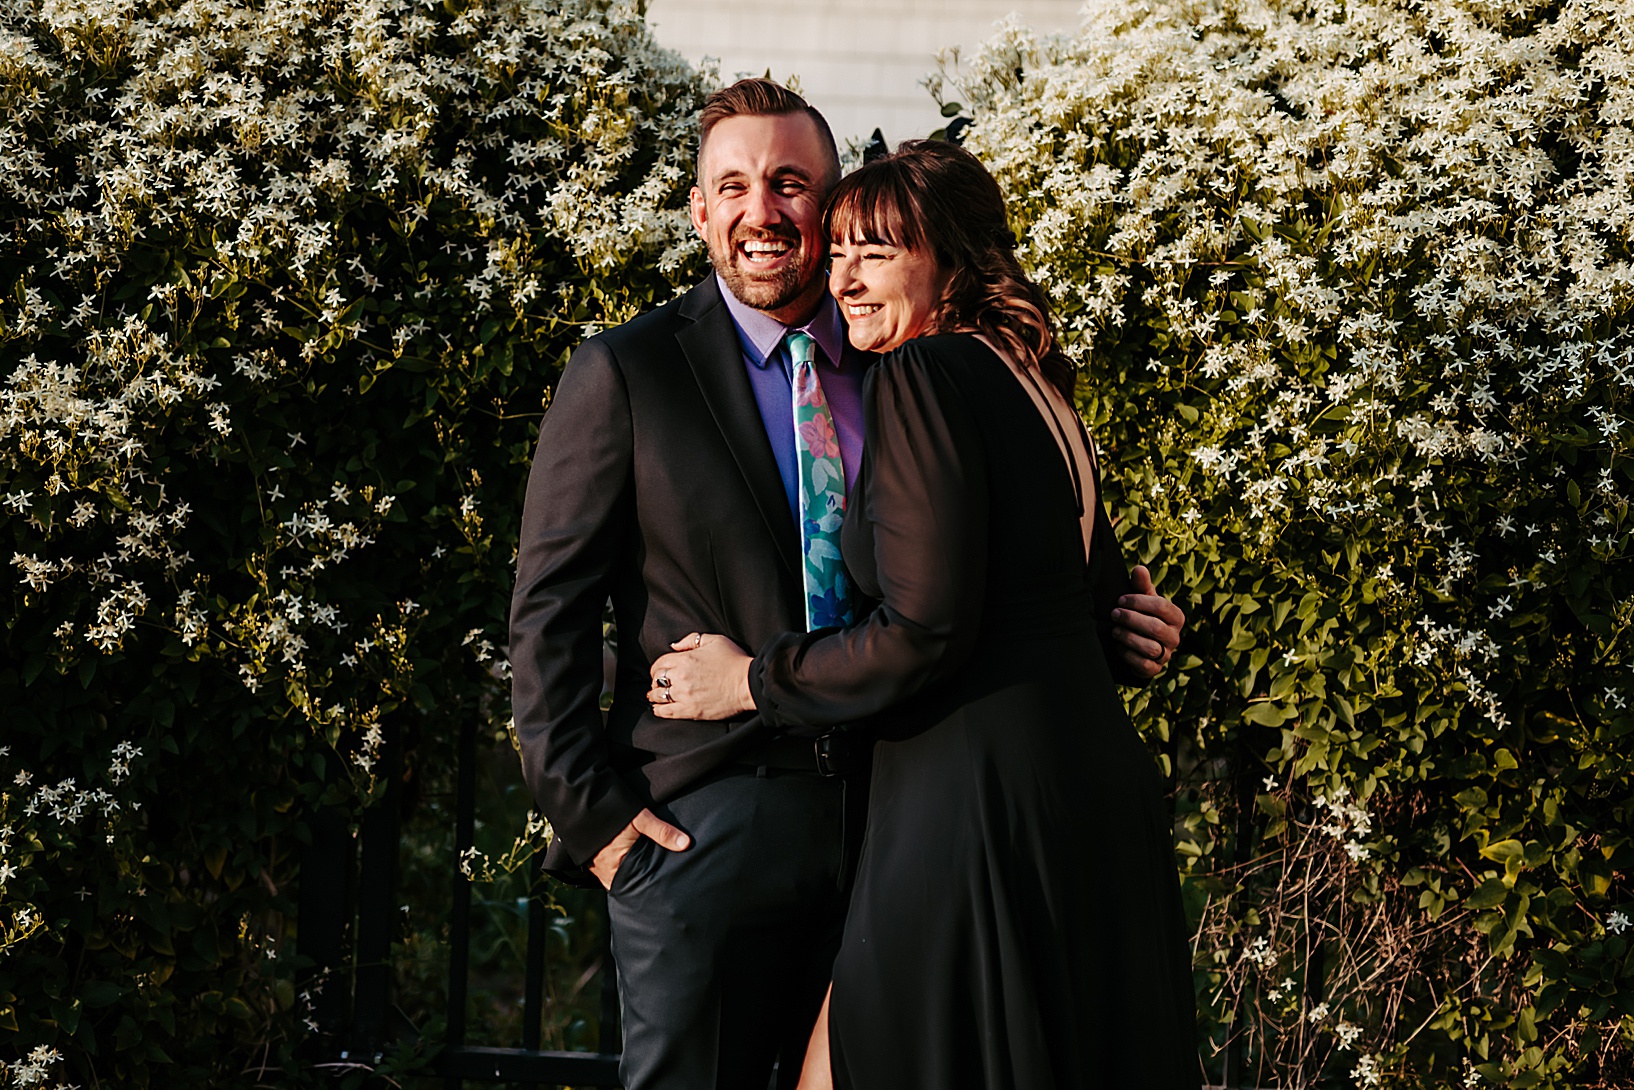 man and woman in formal attire hugging each other and laughing in front of flowers